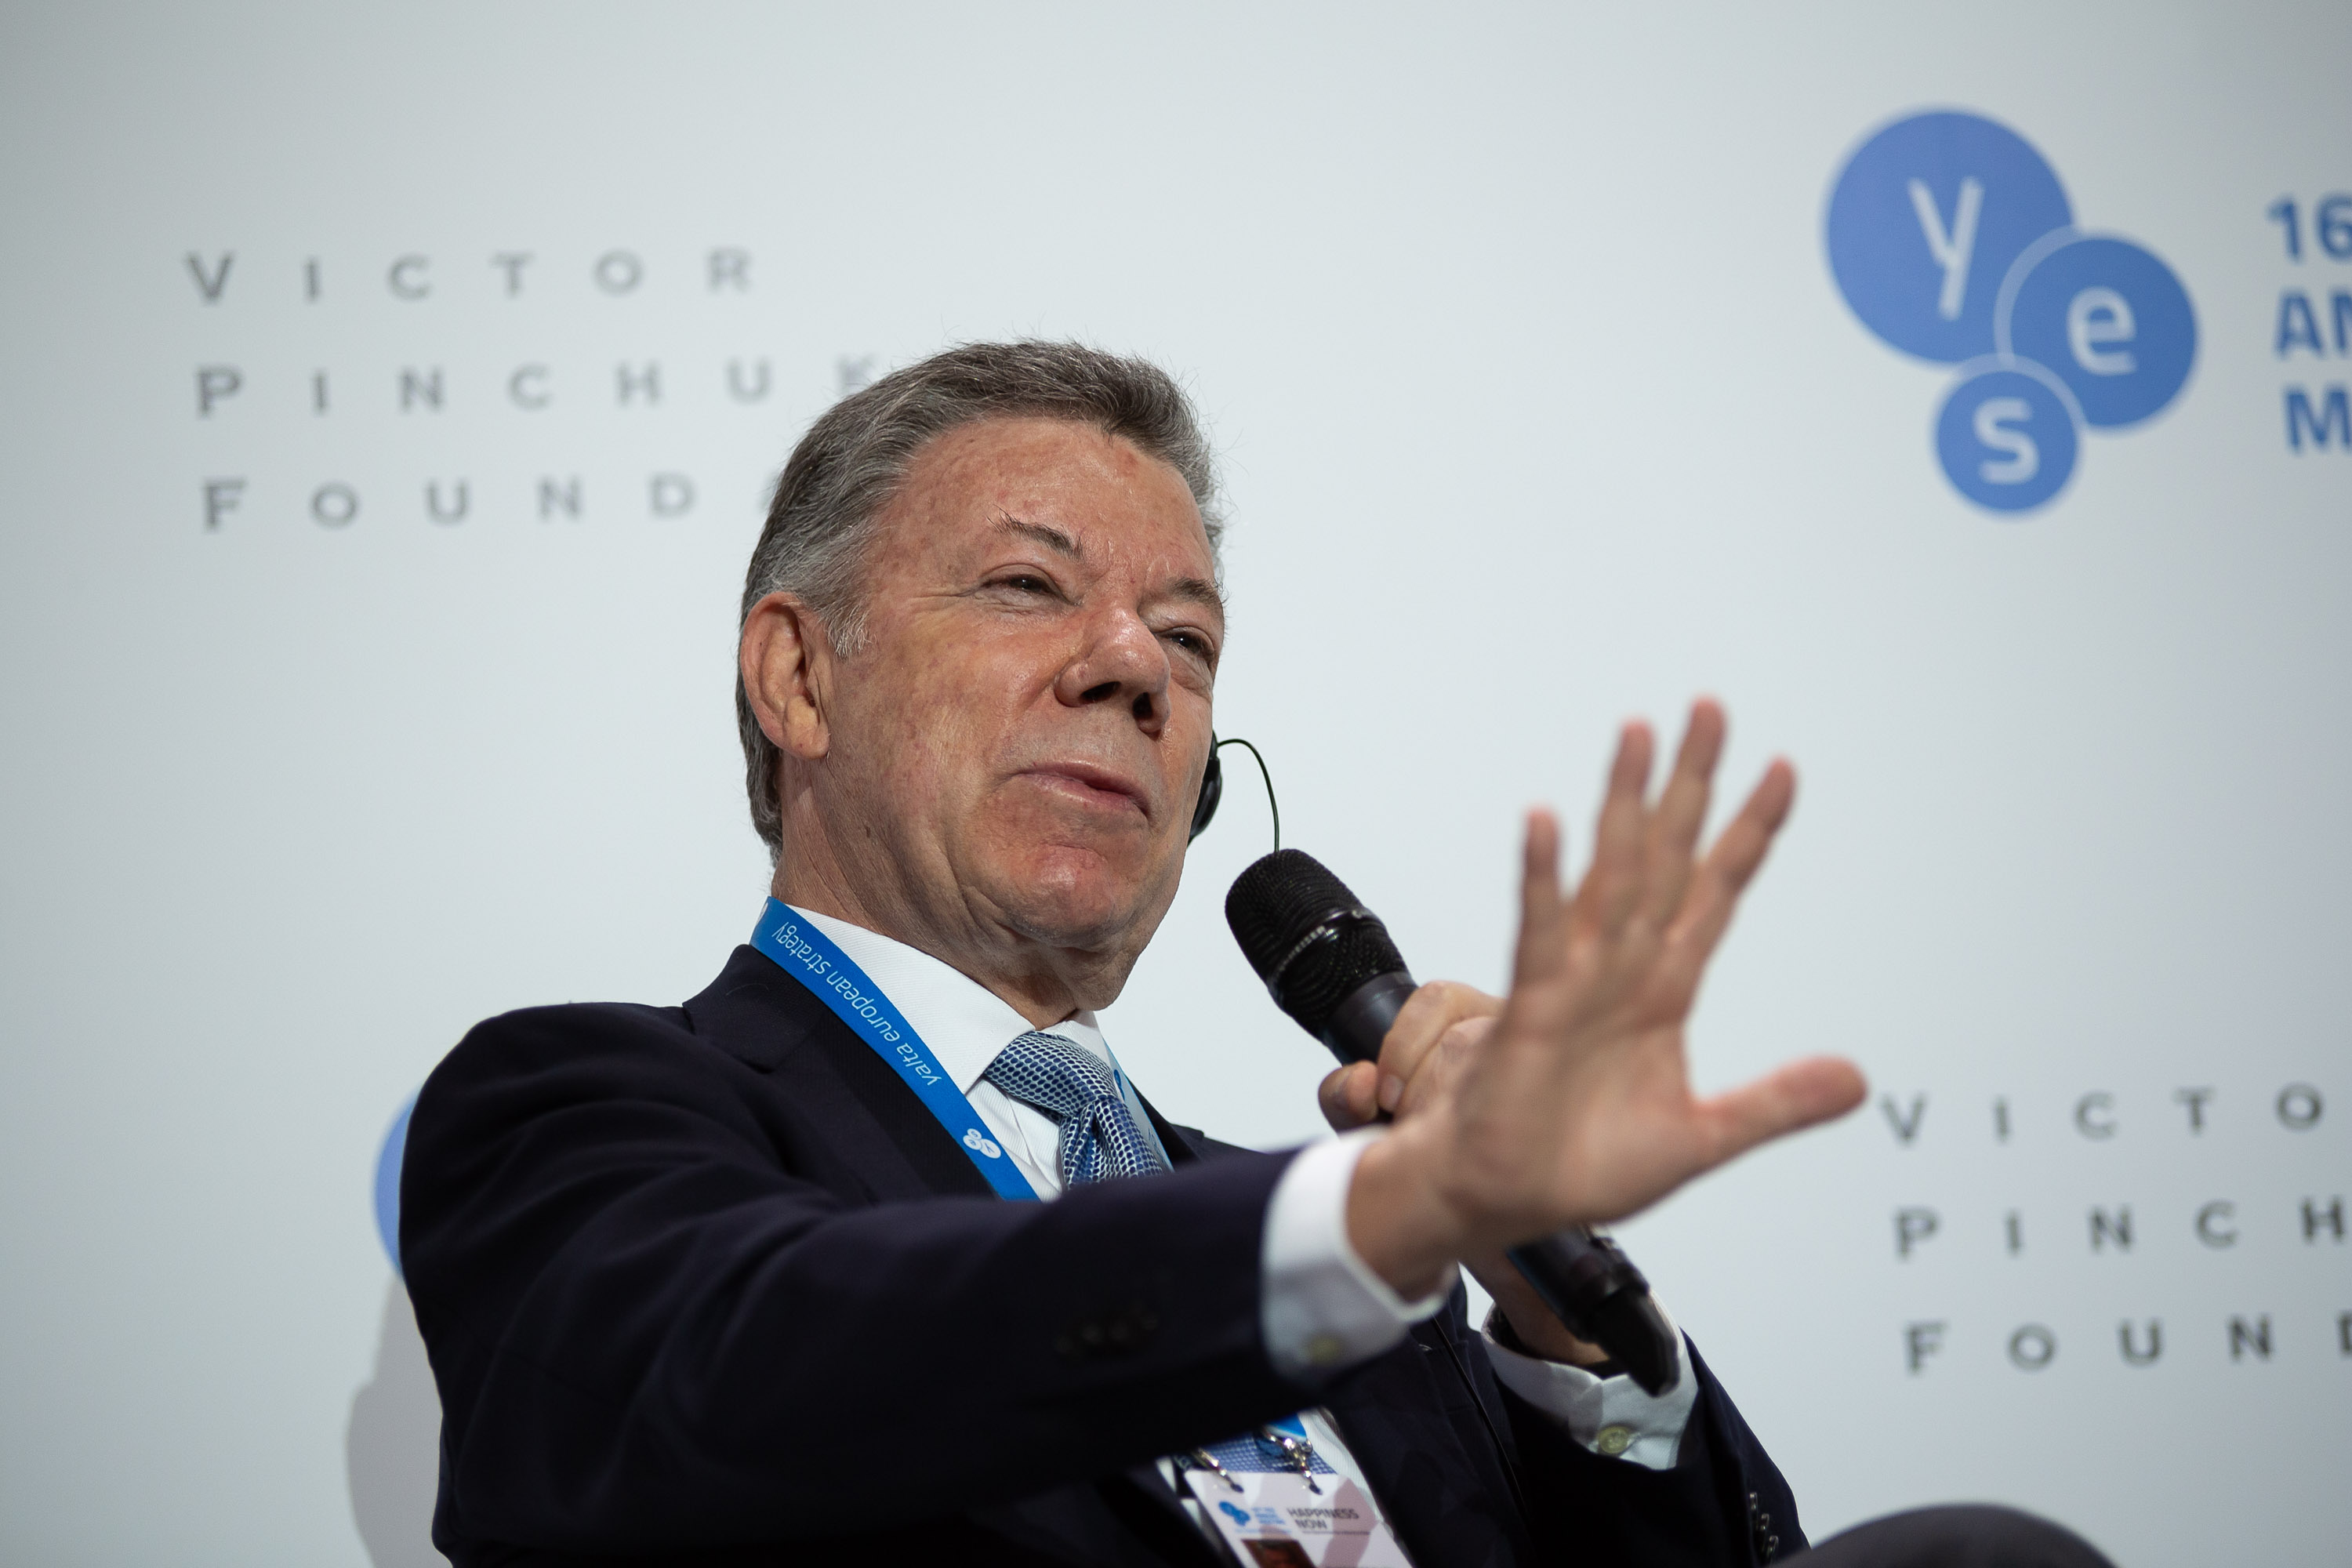 Public lecture “Port of Destiny: From the Impossible to the Possible” by H.E. Juan Manuel Santos Calderón